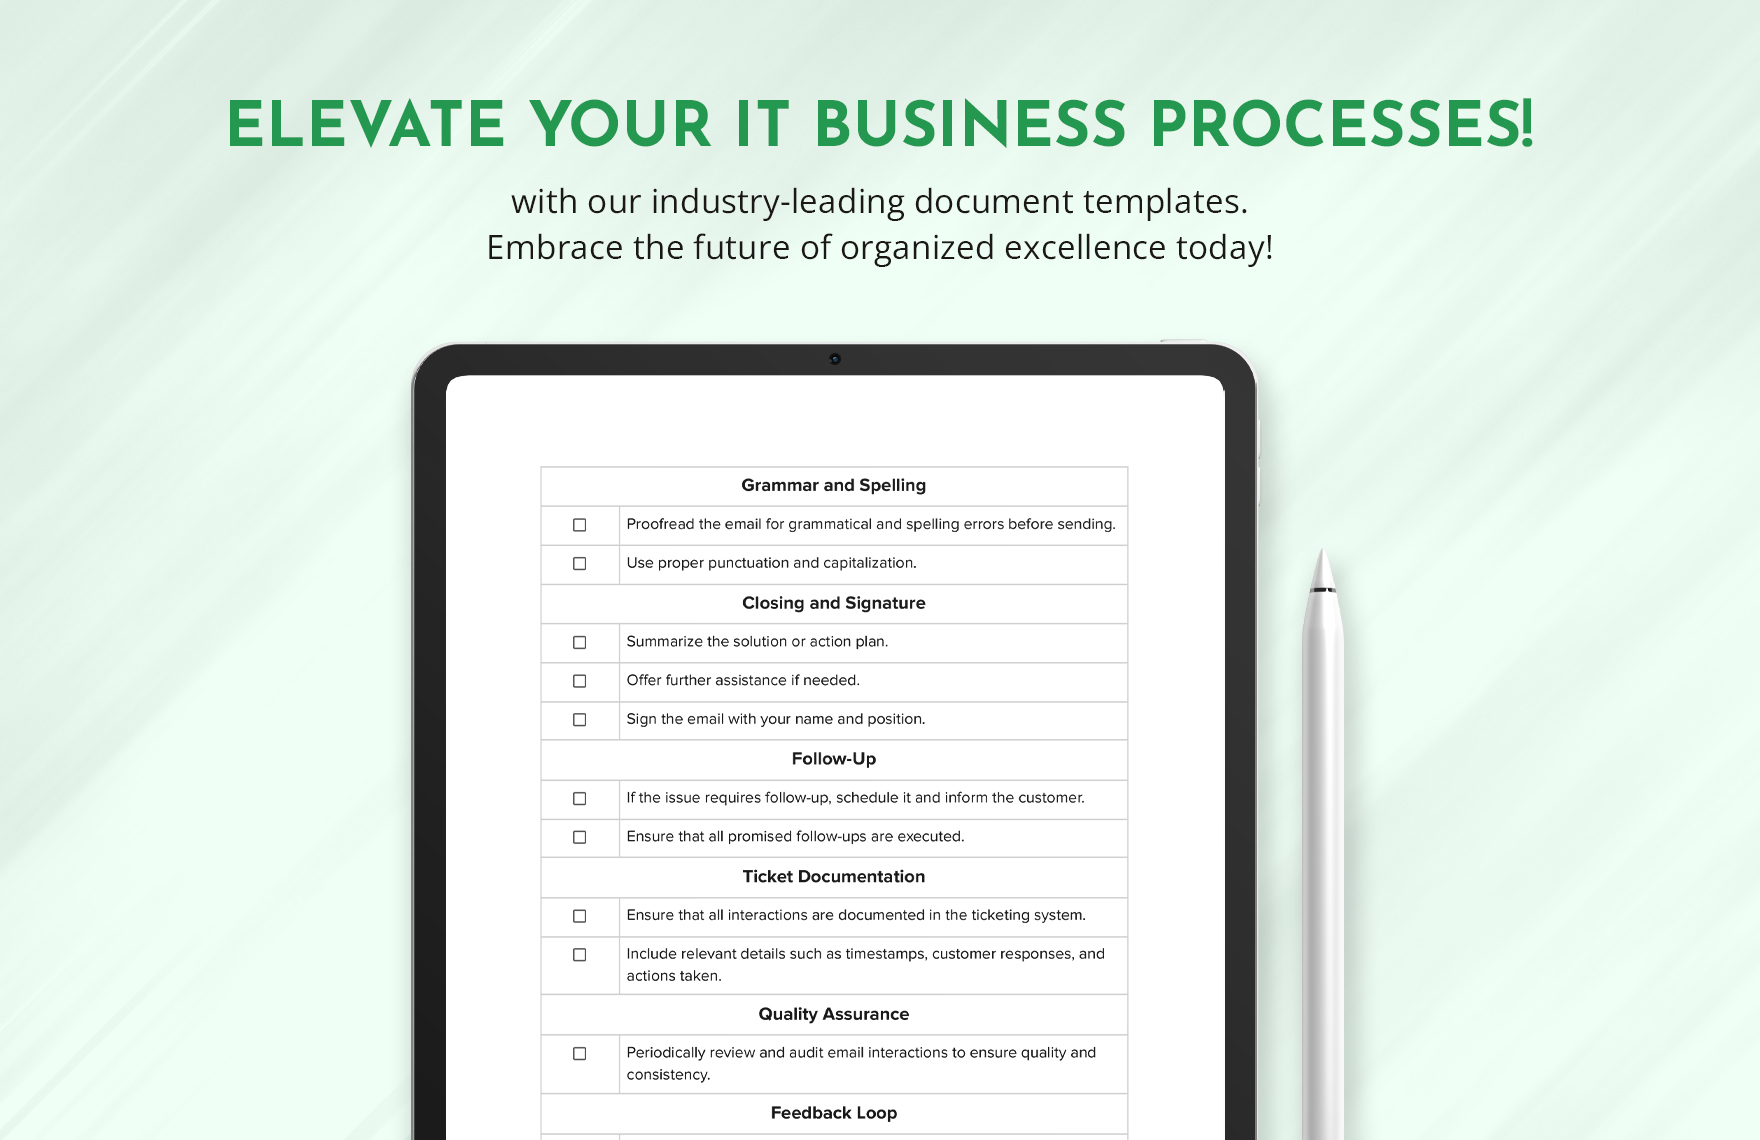 IT Email Support Checklist Template